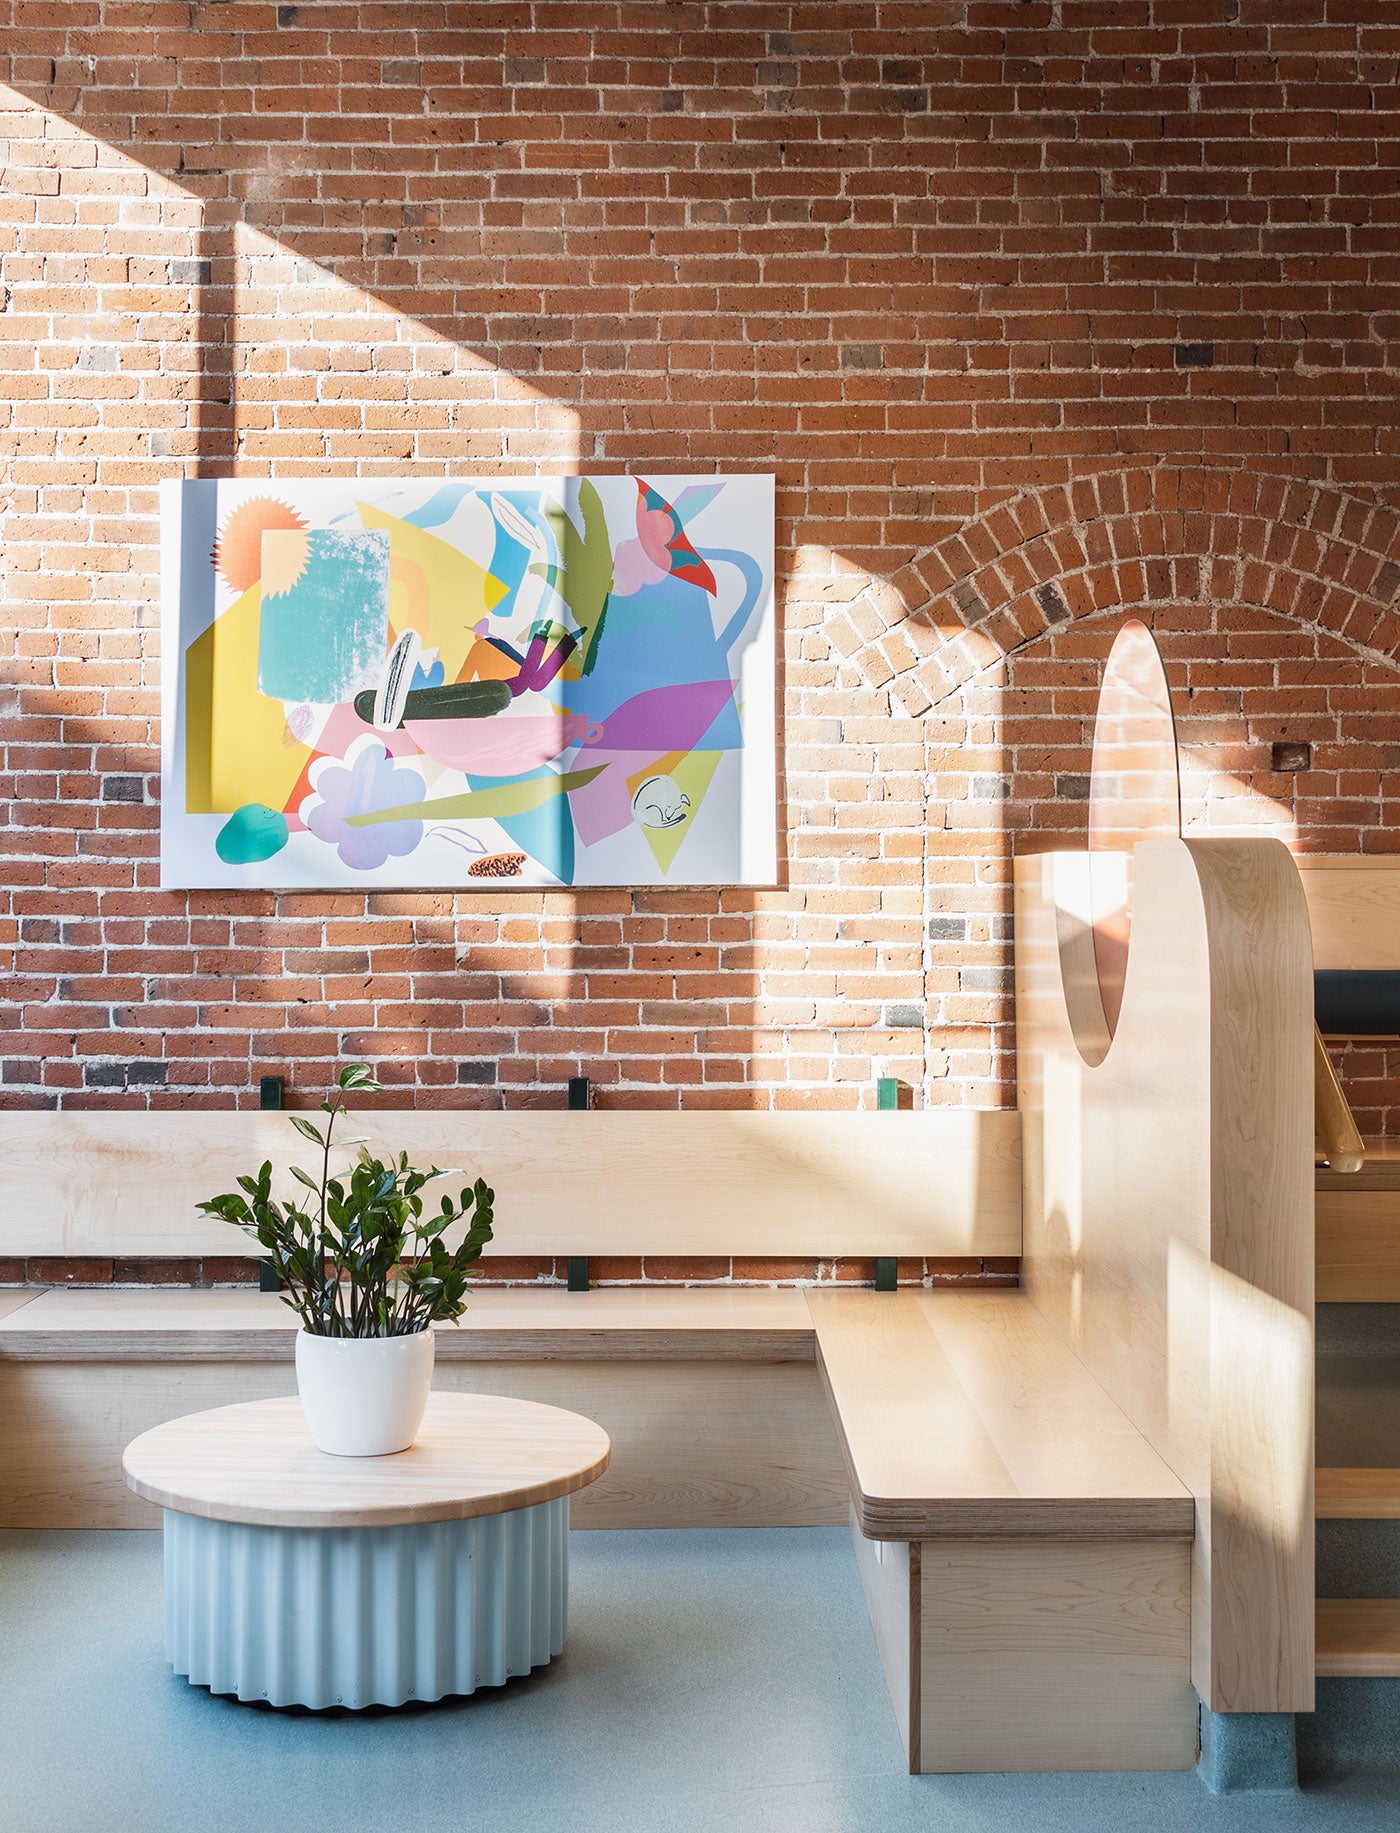 Bright modern cafe interior design featuring abstract art on brick wall